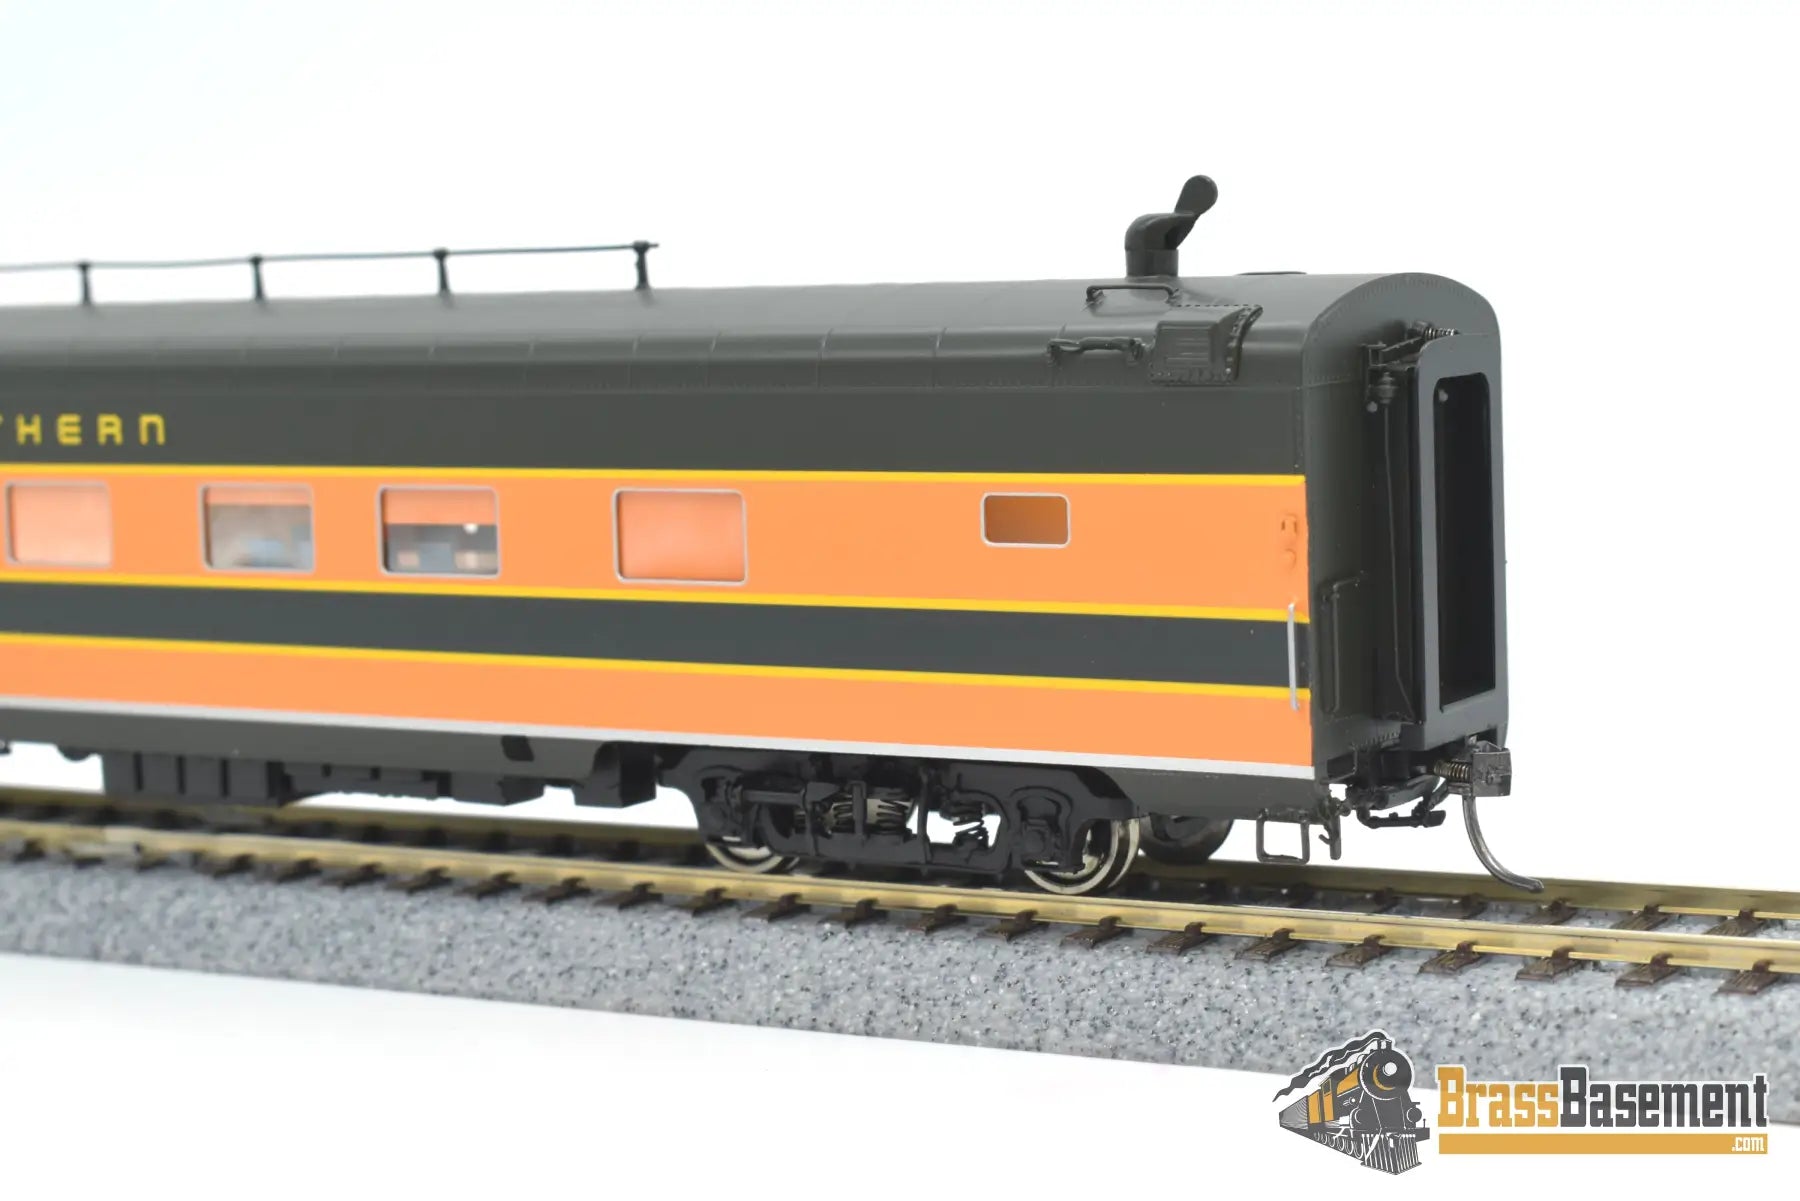 Ho Brass - North Bank Line Nbl Gn Great Northern A28 1950S Skirted Version Brand New Passenger